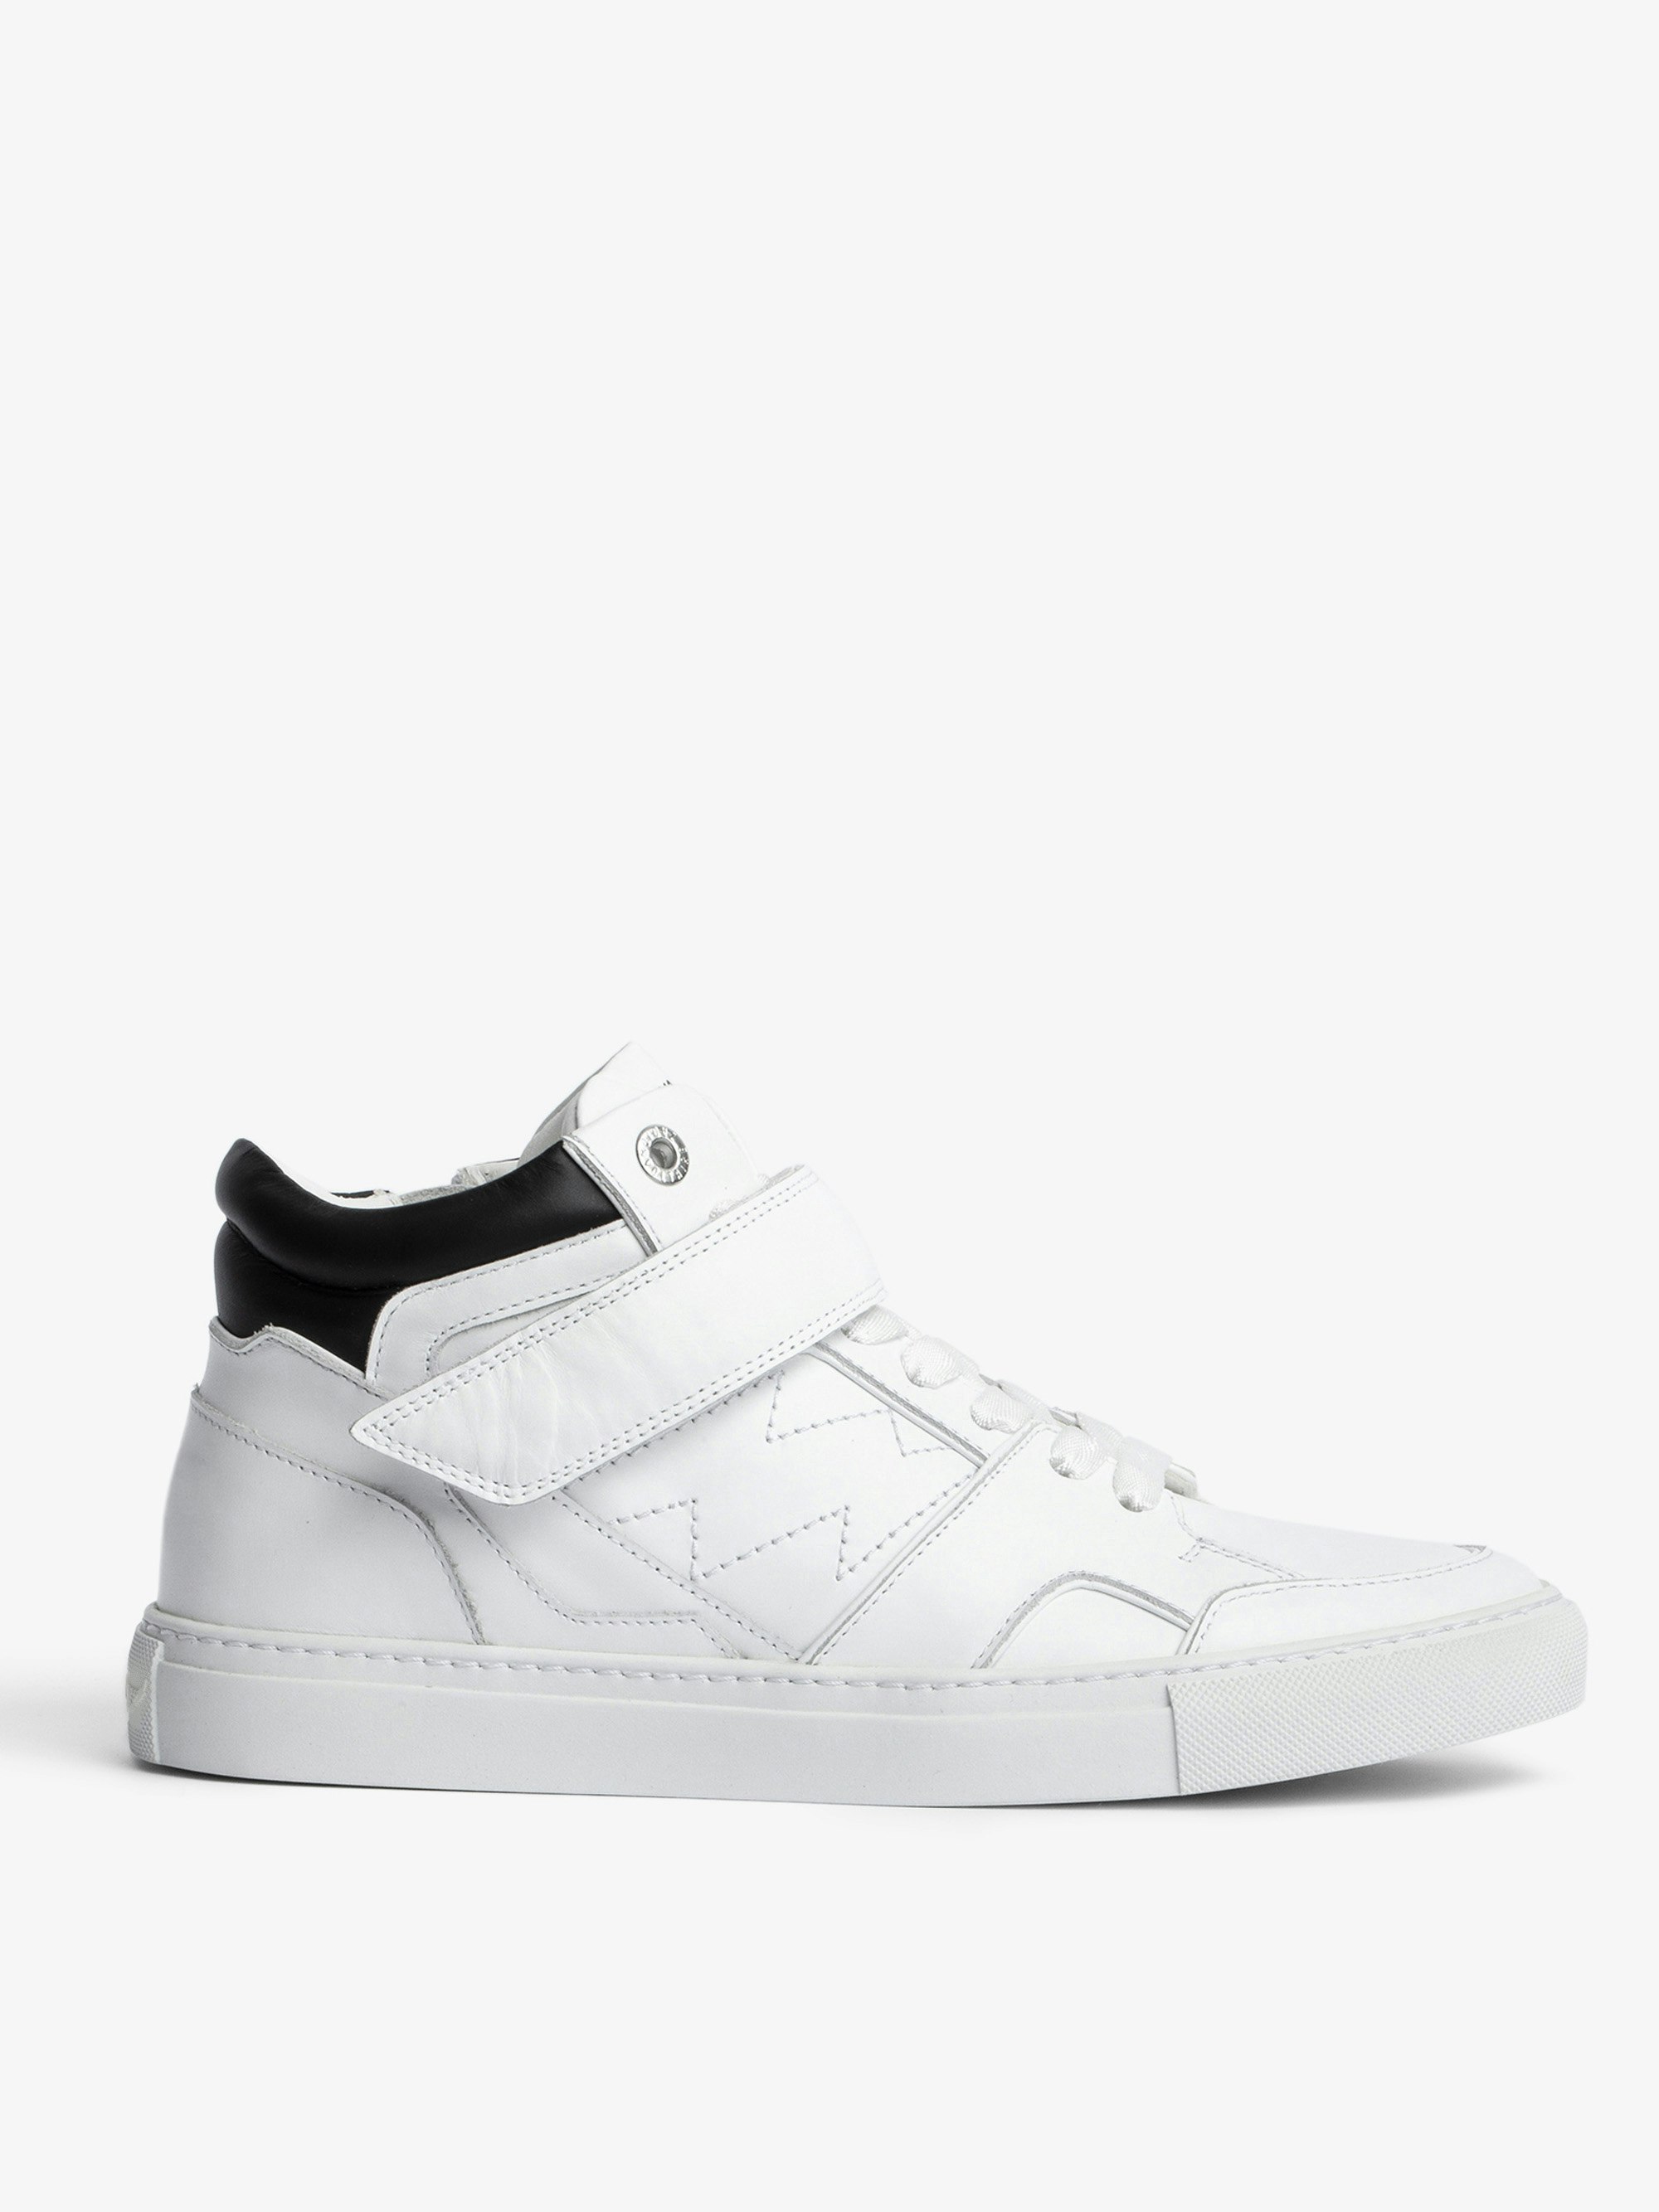 ZV1747 Mid Flash trainers - Women’s white leather mid-top sneakers